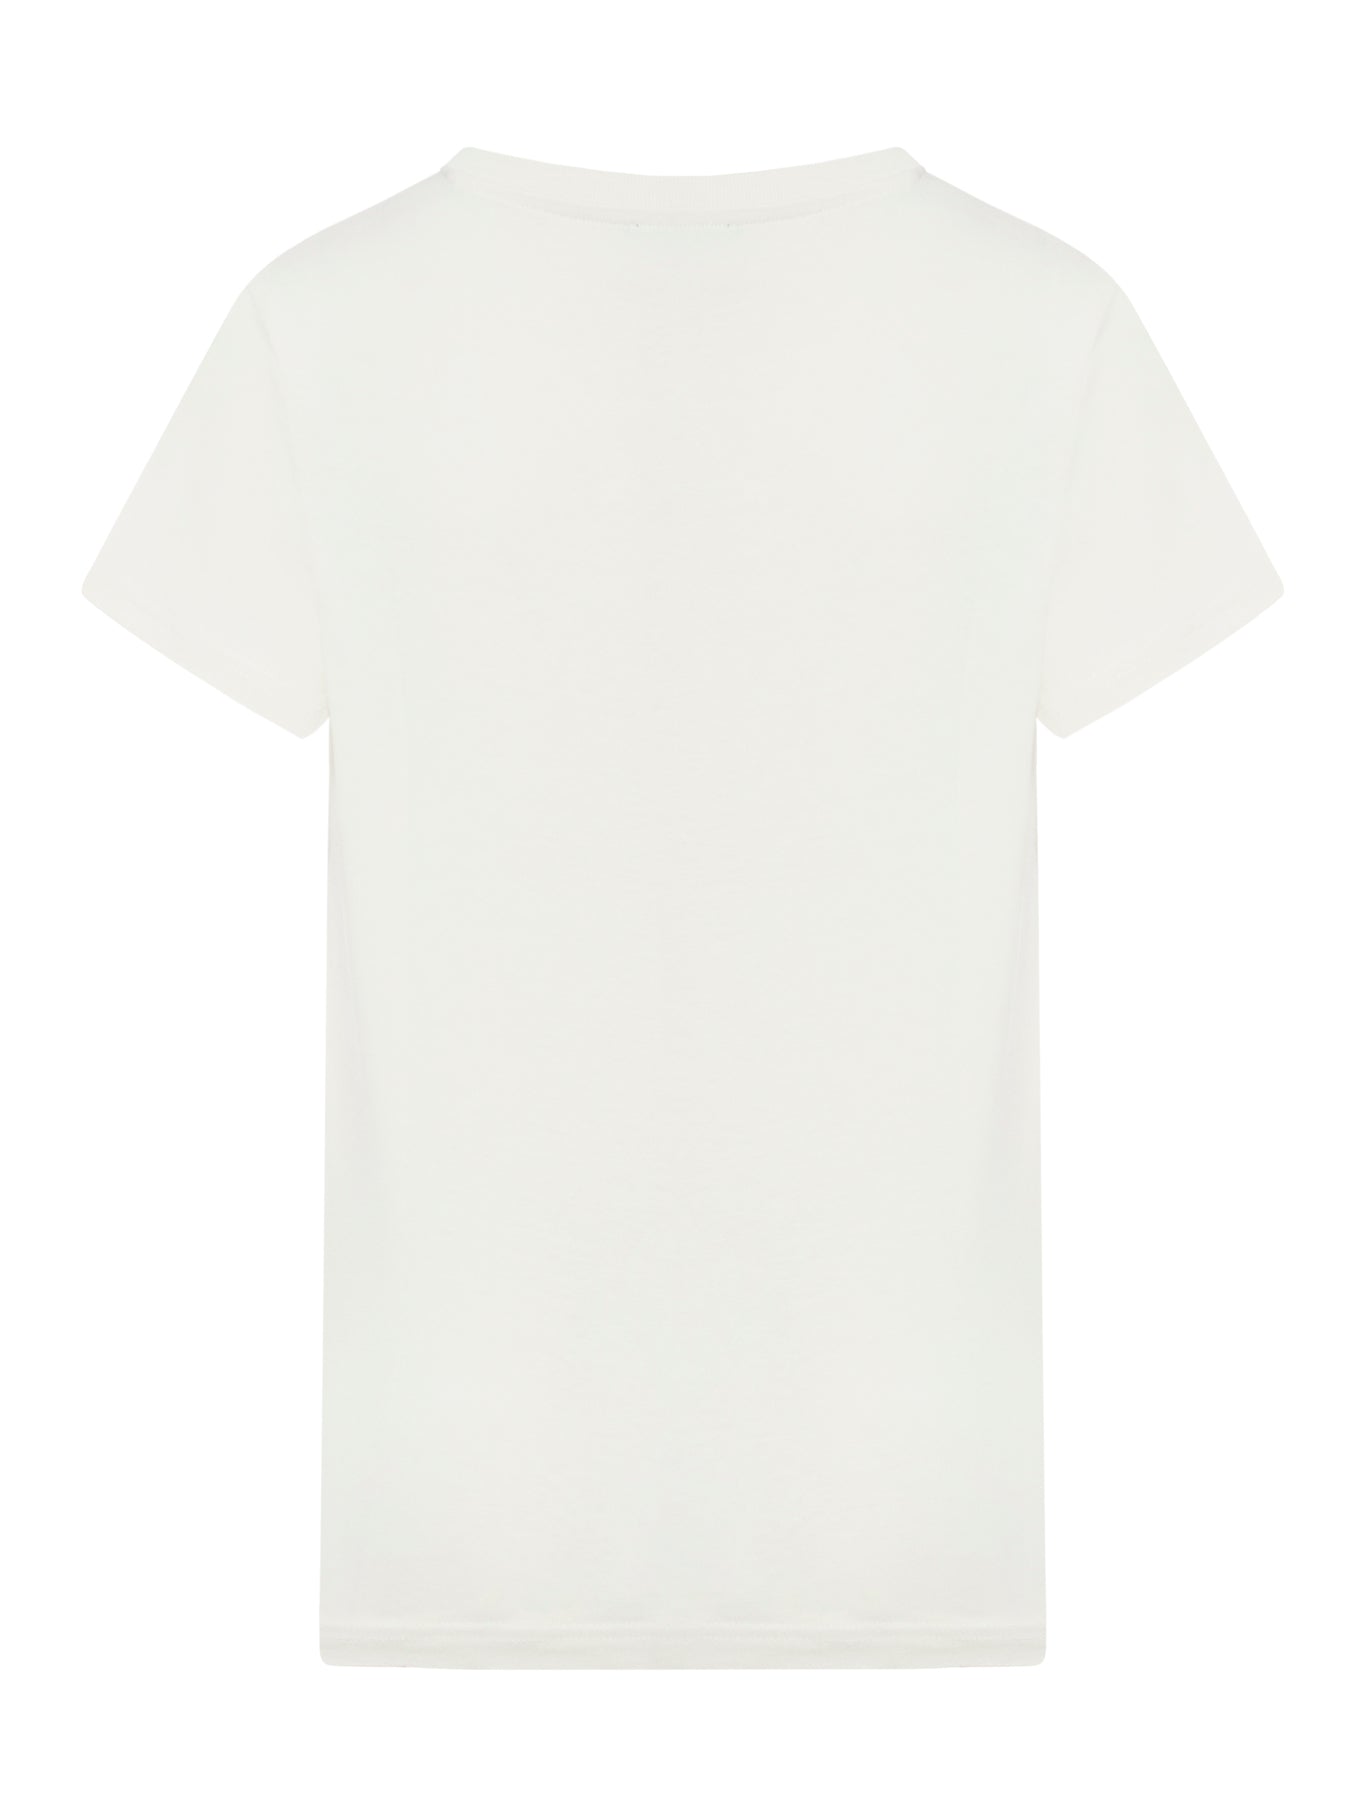 T-shirt Denise in cotone con logo